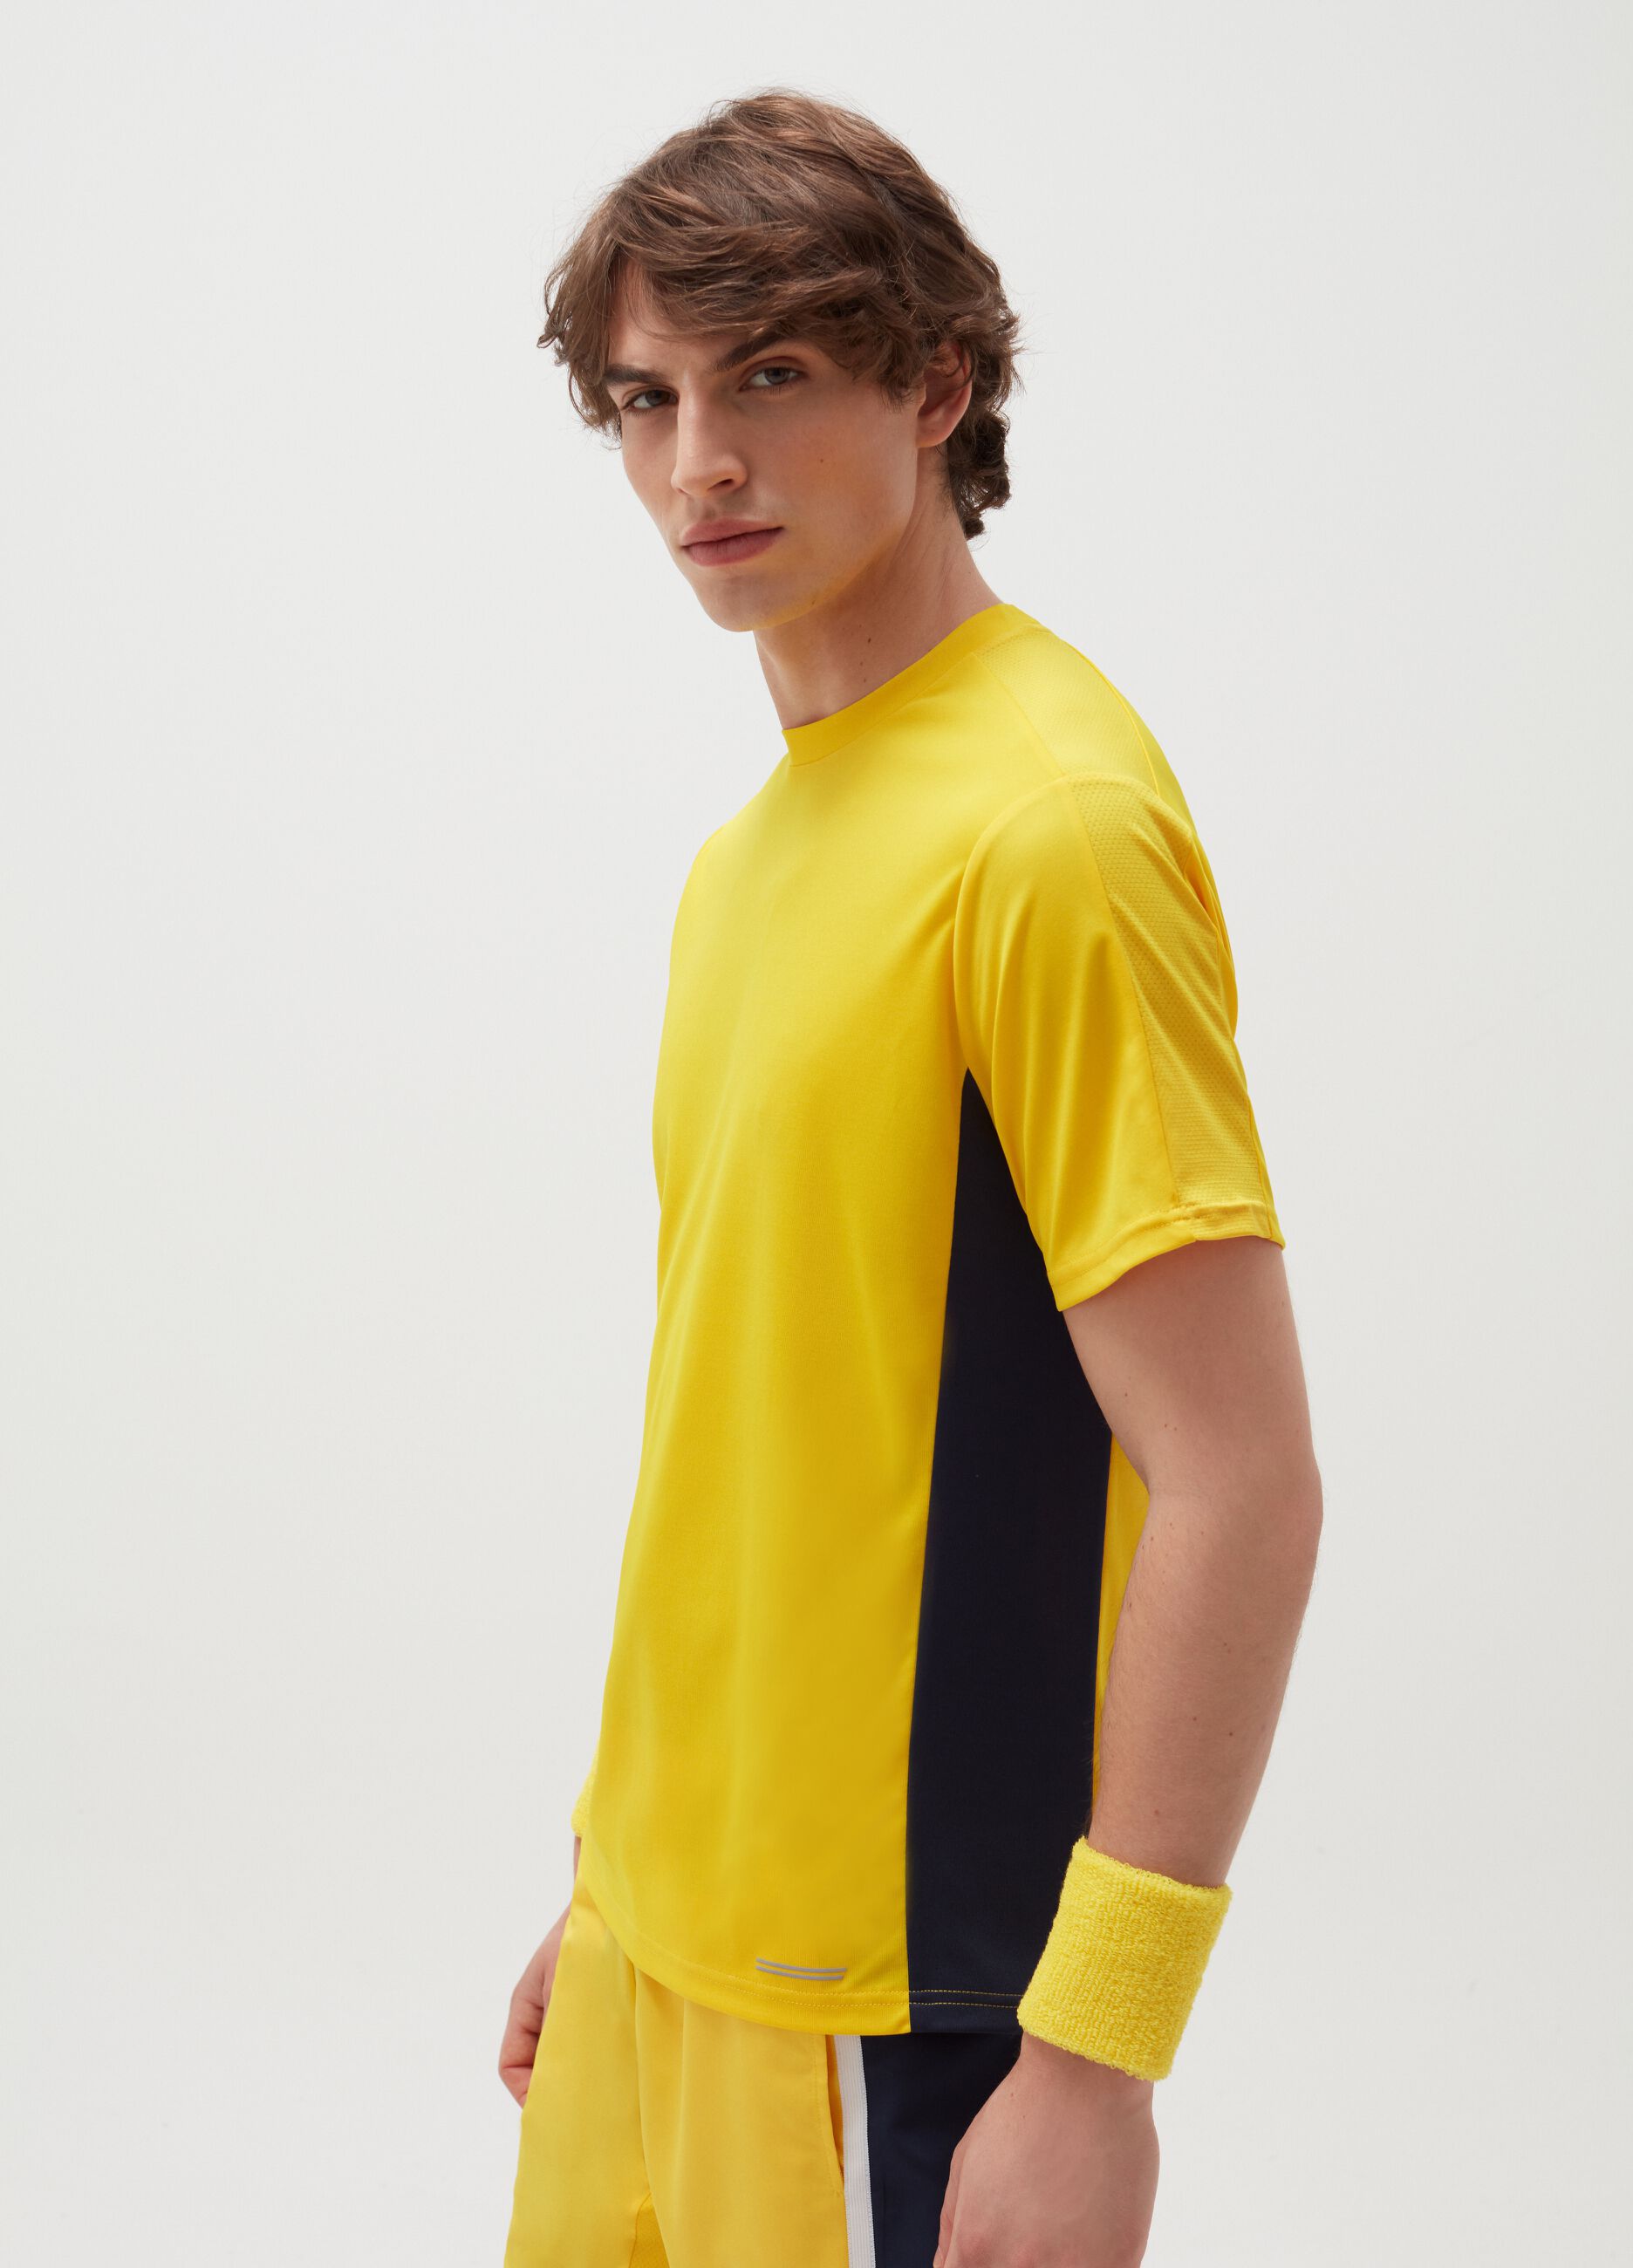 Active Tennis T-shirt with contrasting bands